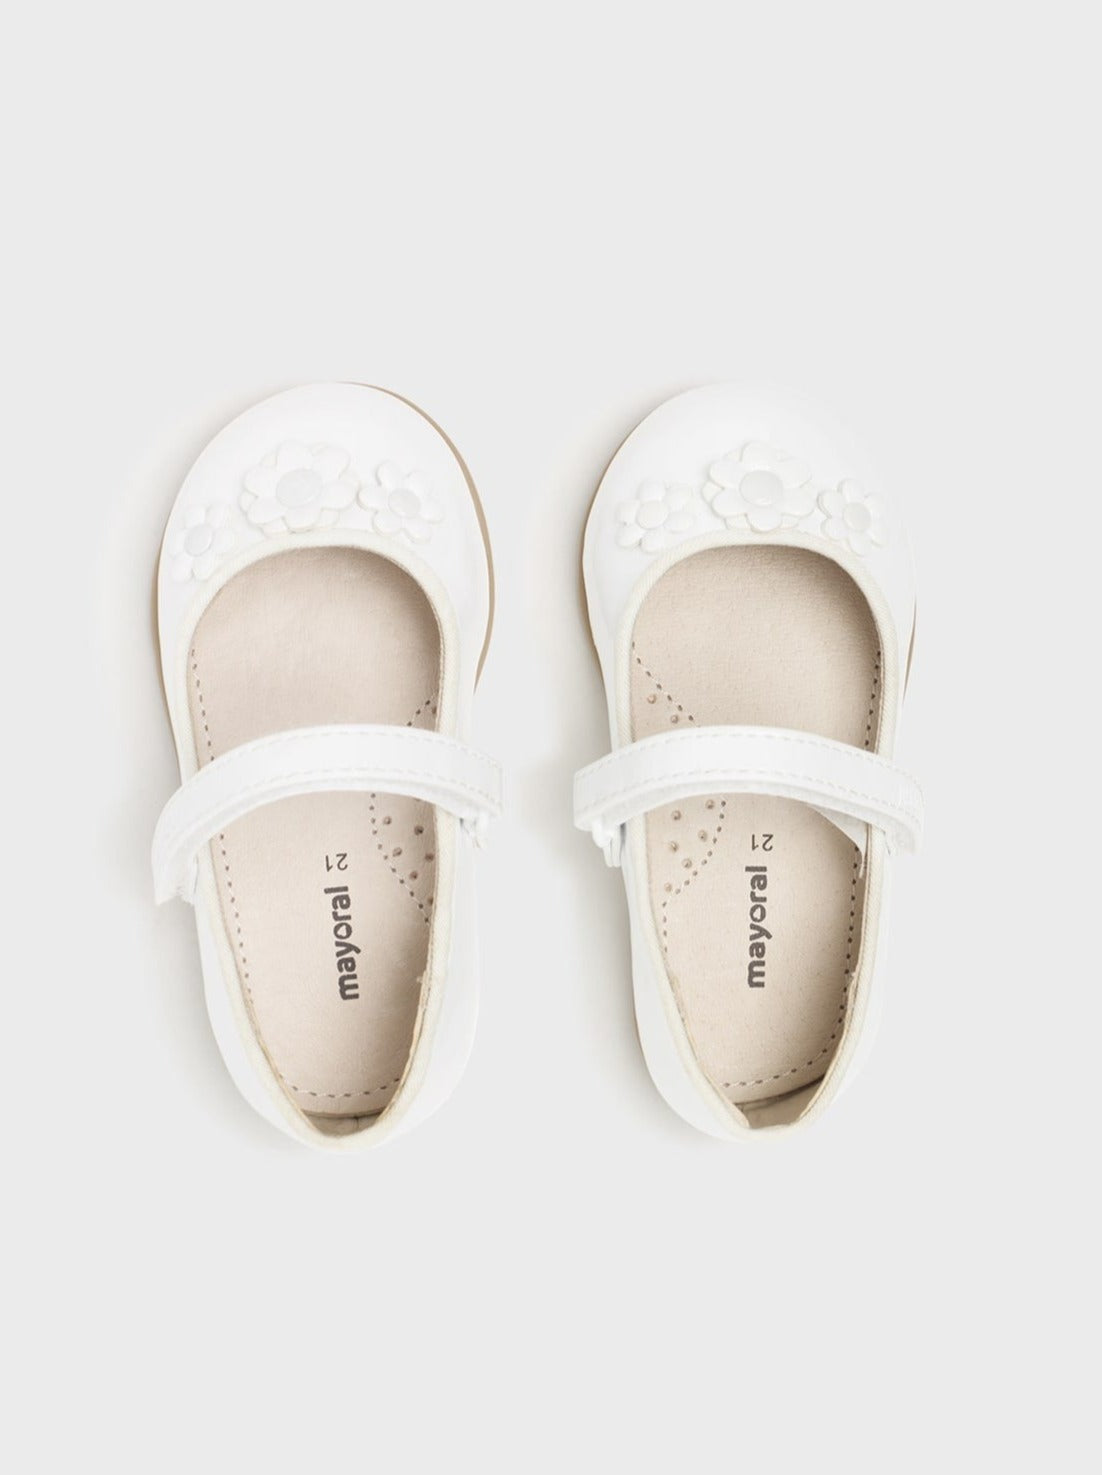 Mayoral Baby Leather Mary Janes White_41442-080